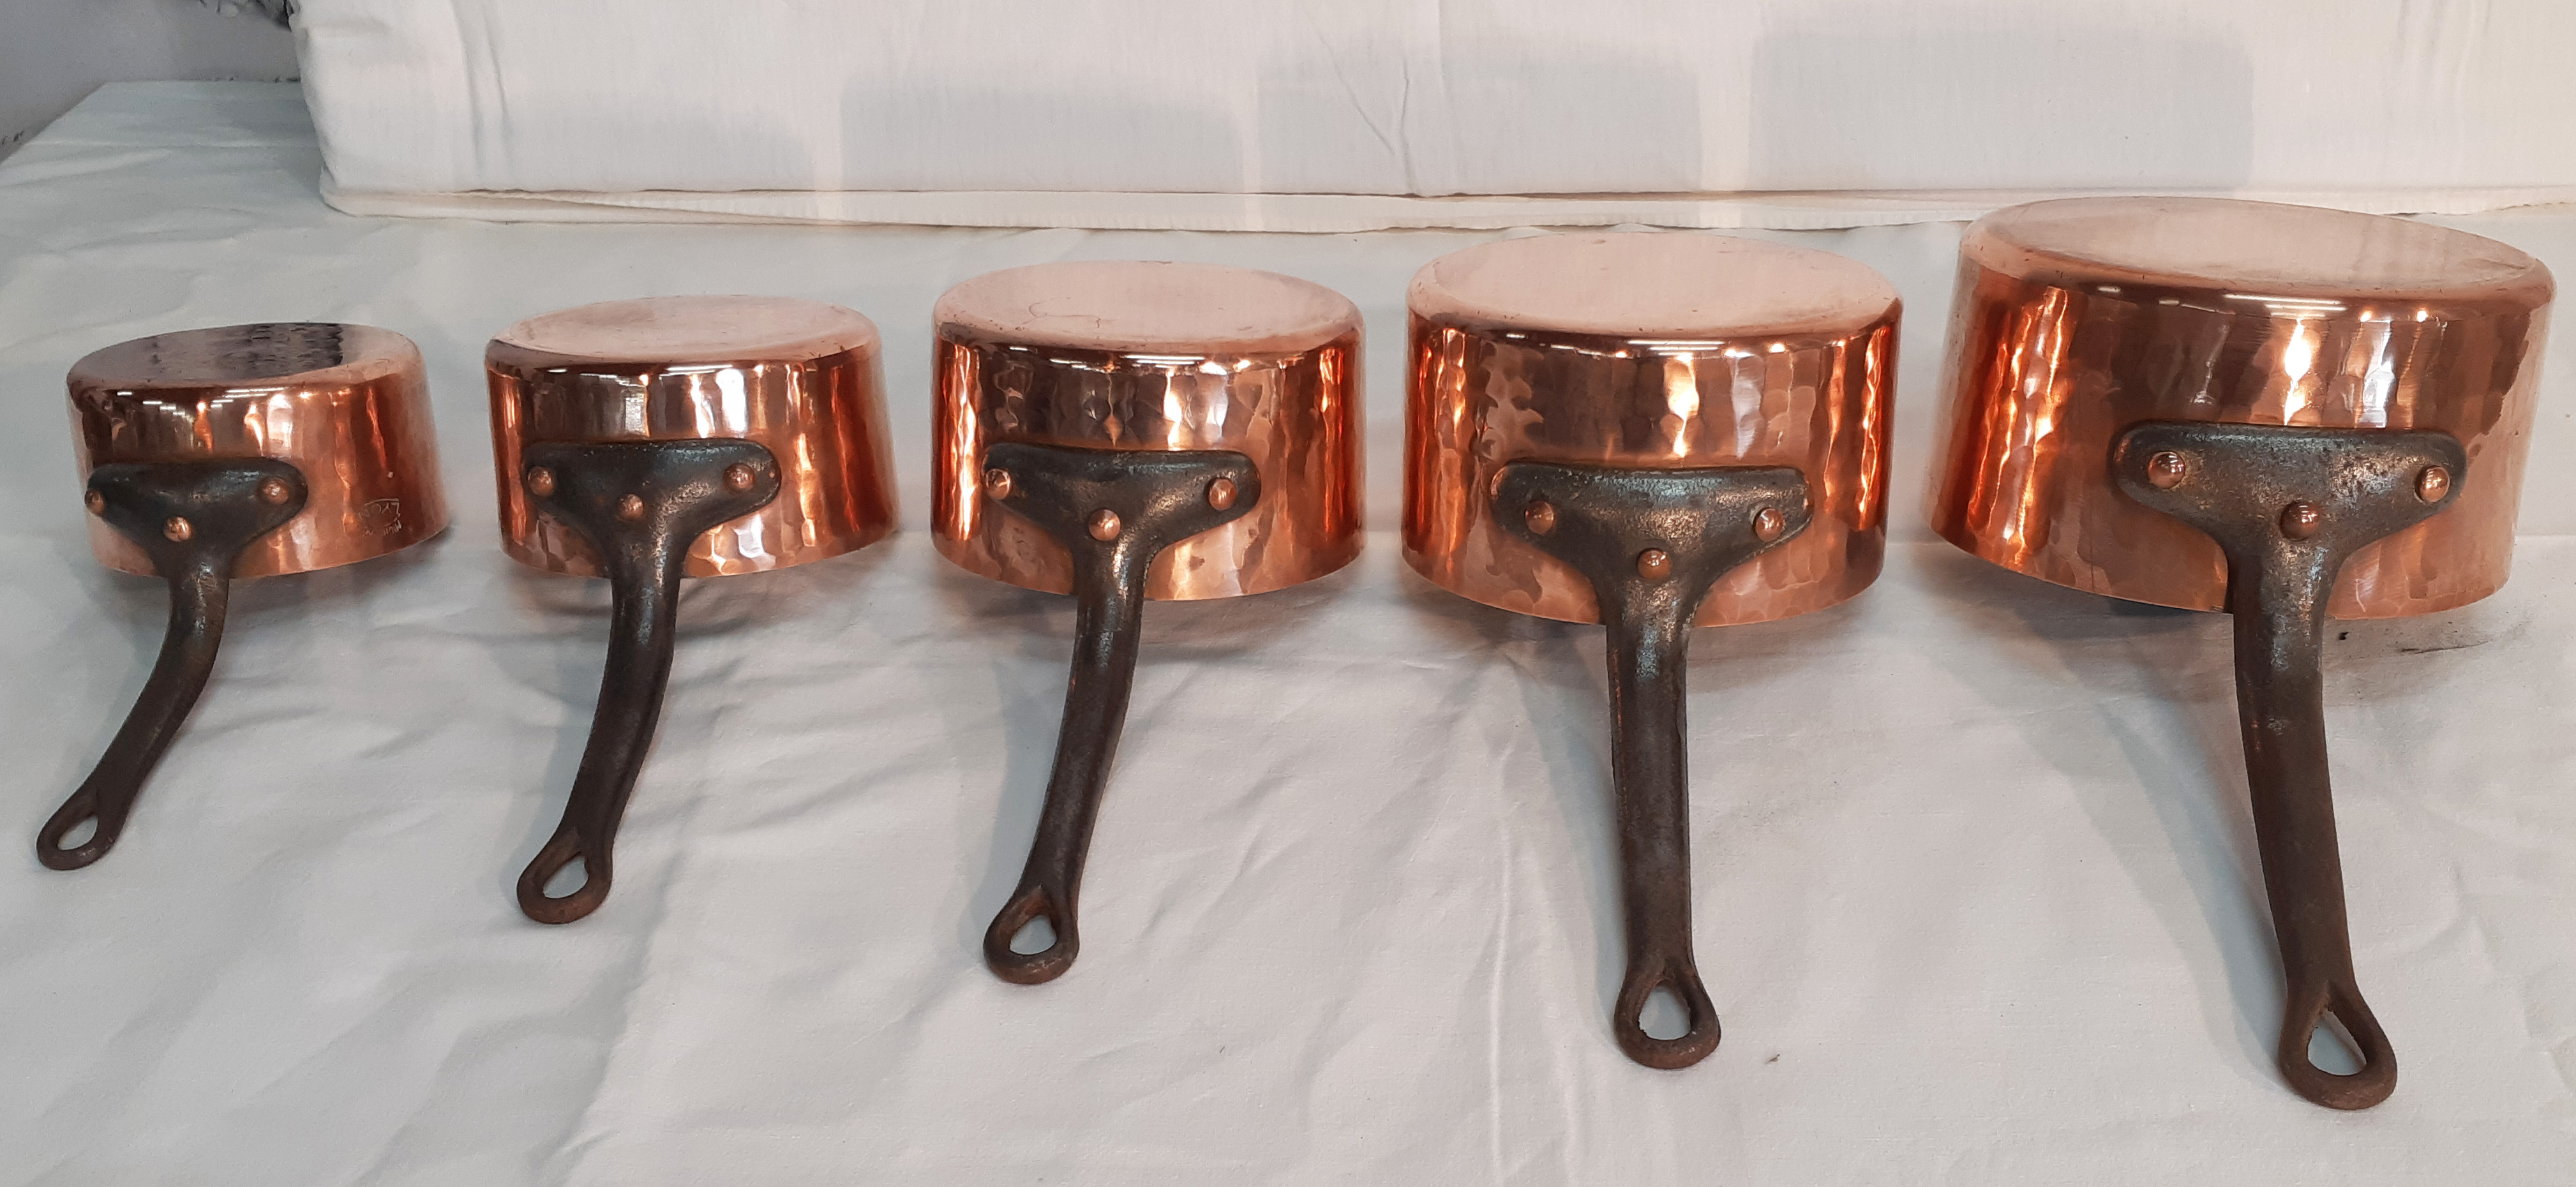 GRADUATING SET OF 5 FRENCH COPPER 35f322